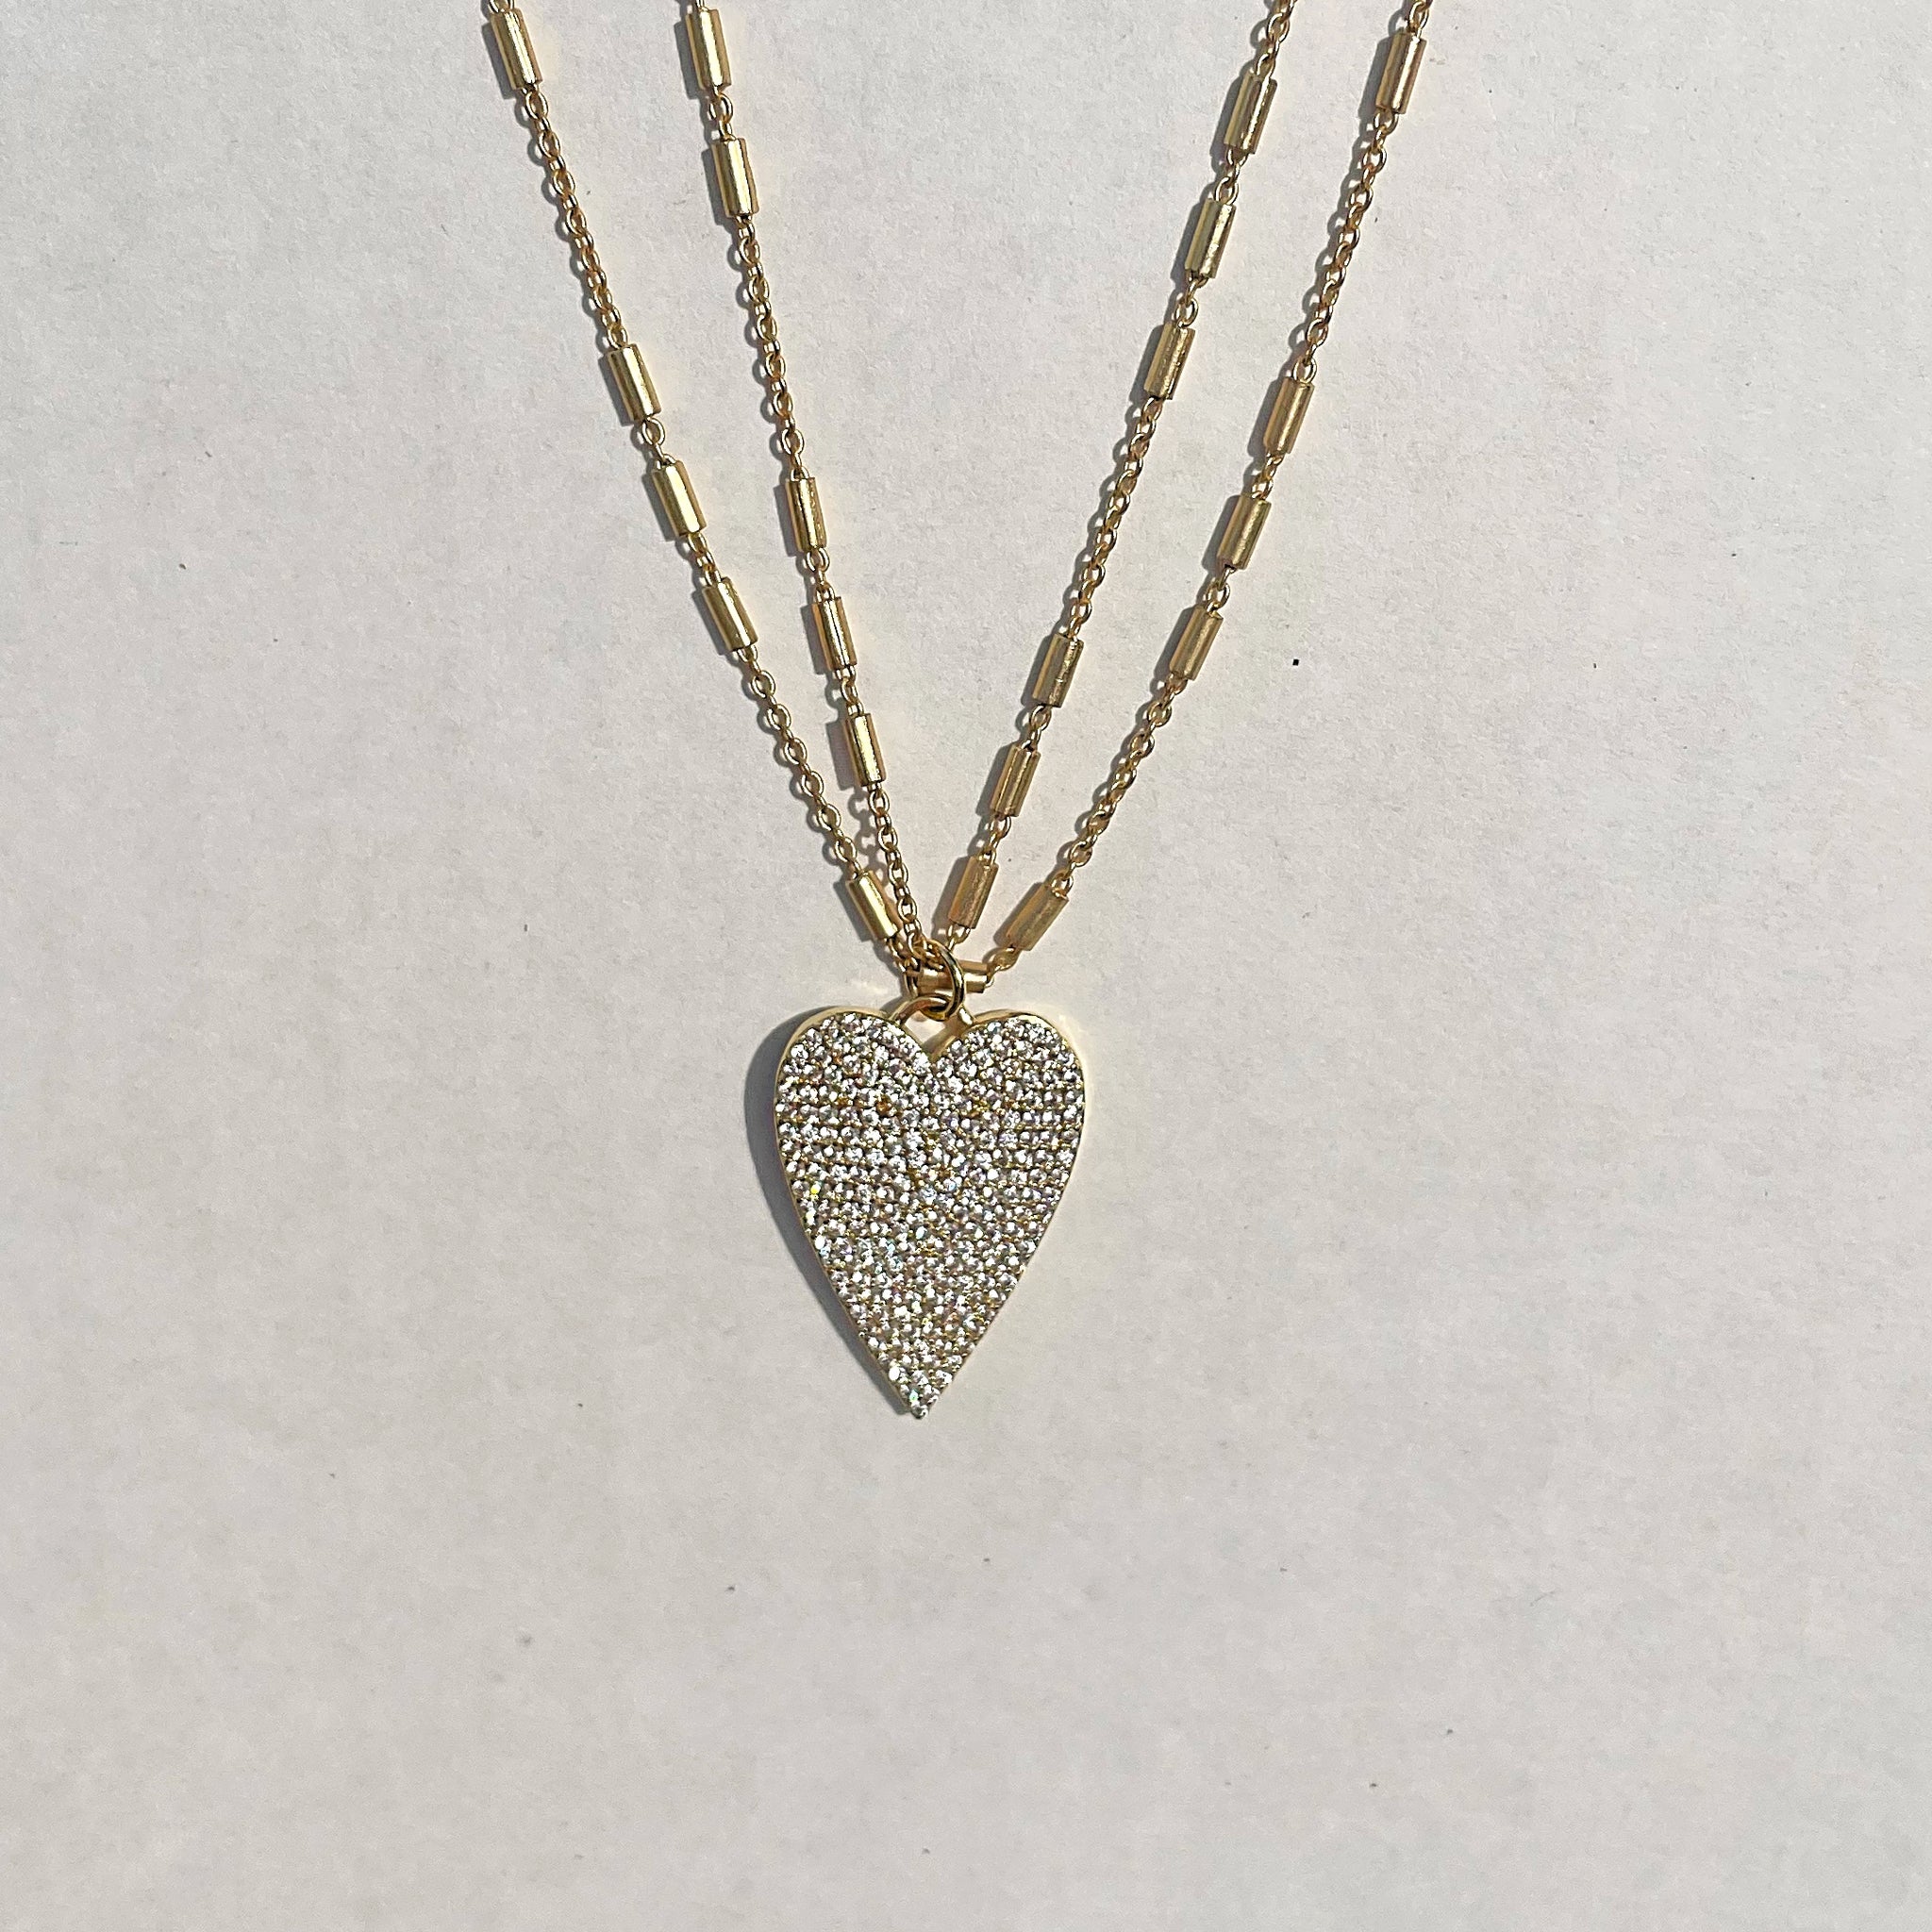 “Amore” Necklace